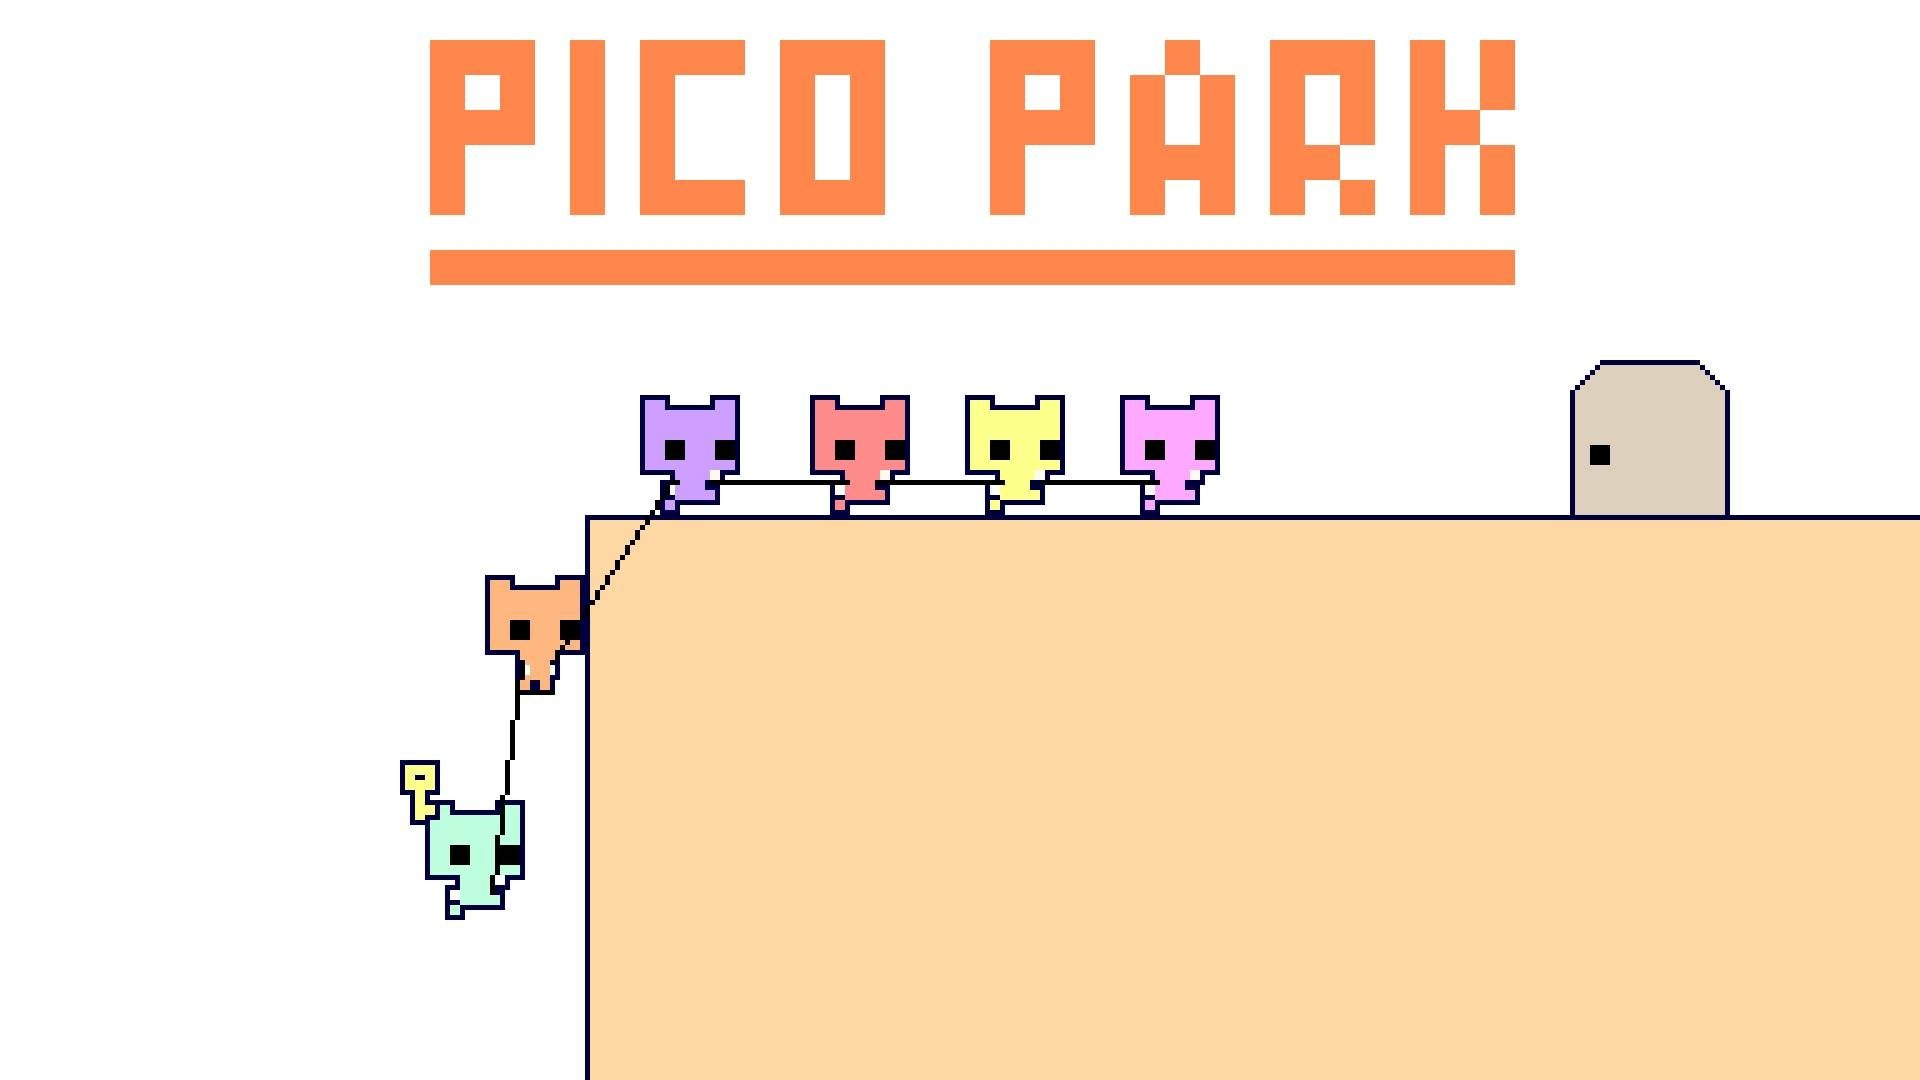 Pico Wallpapers